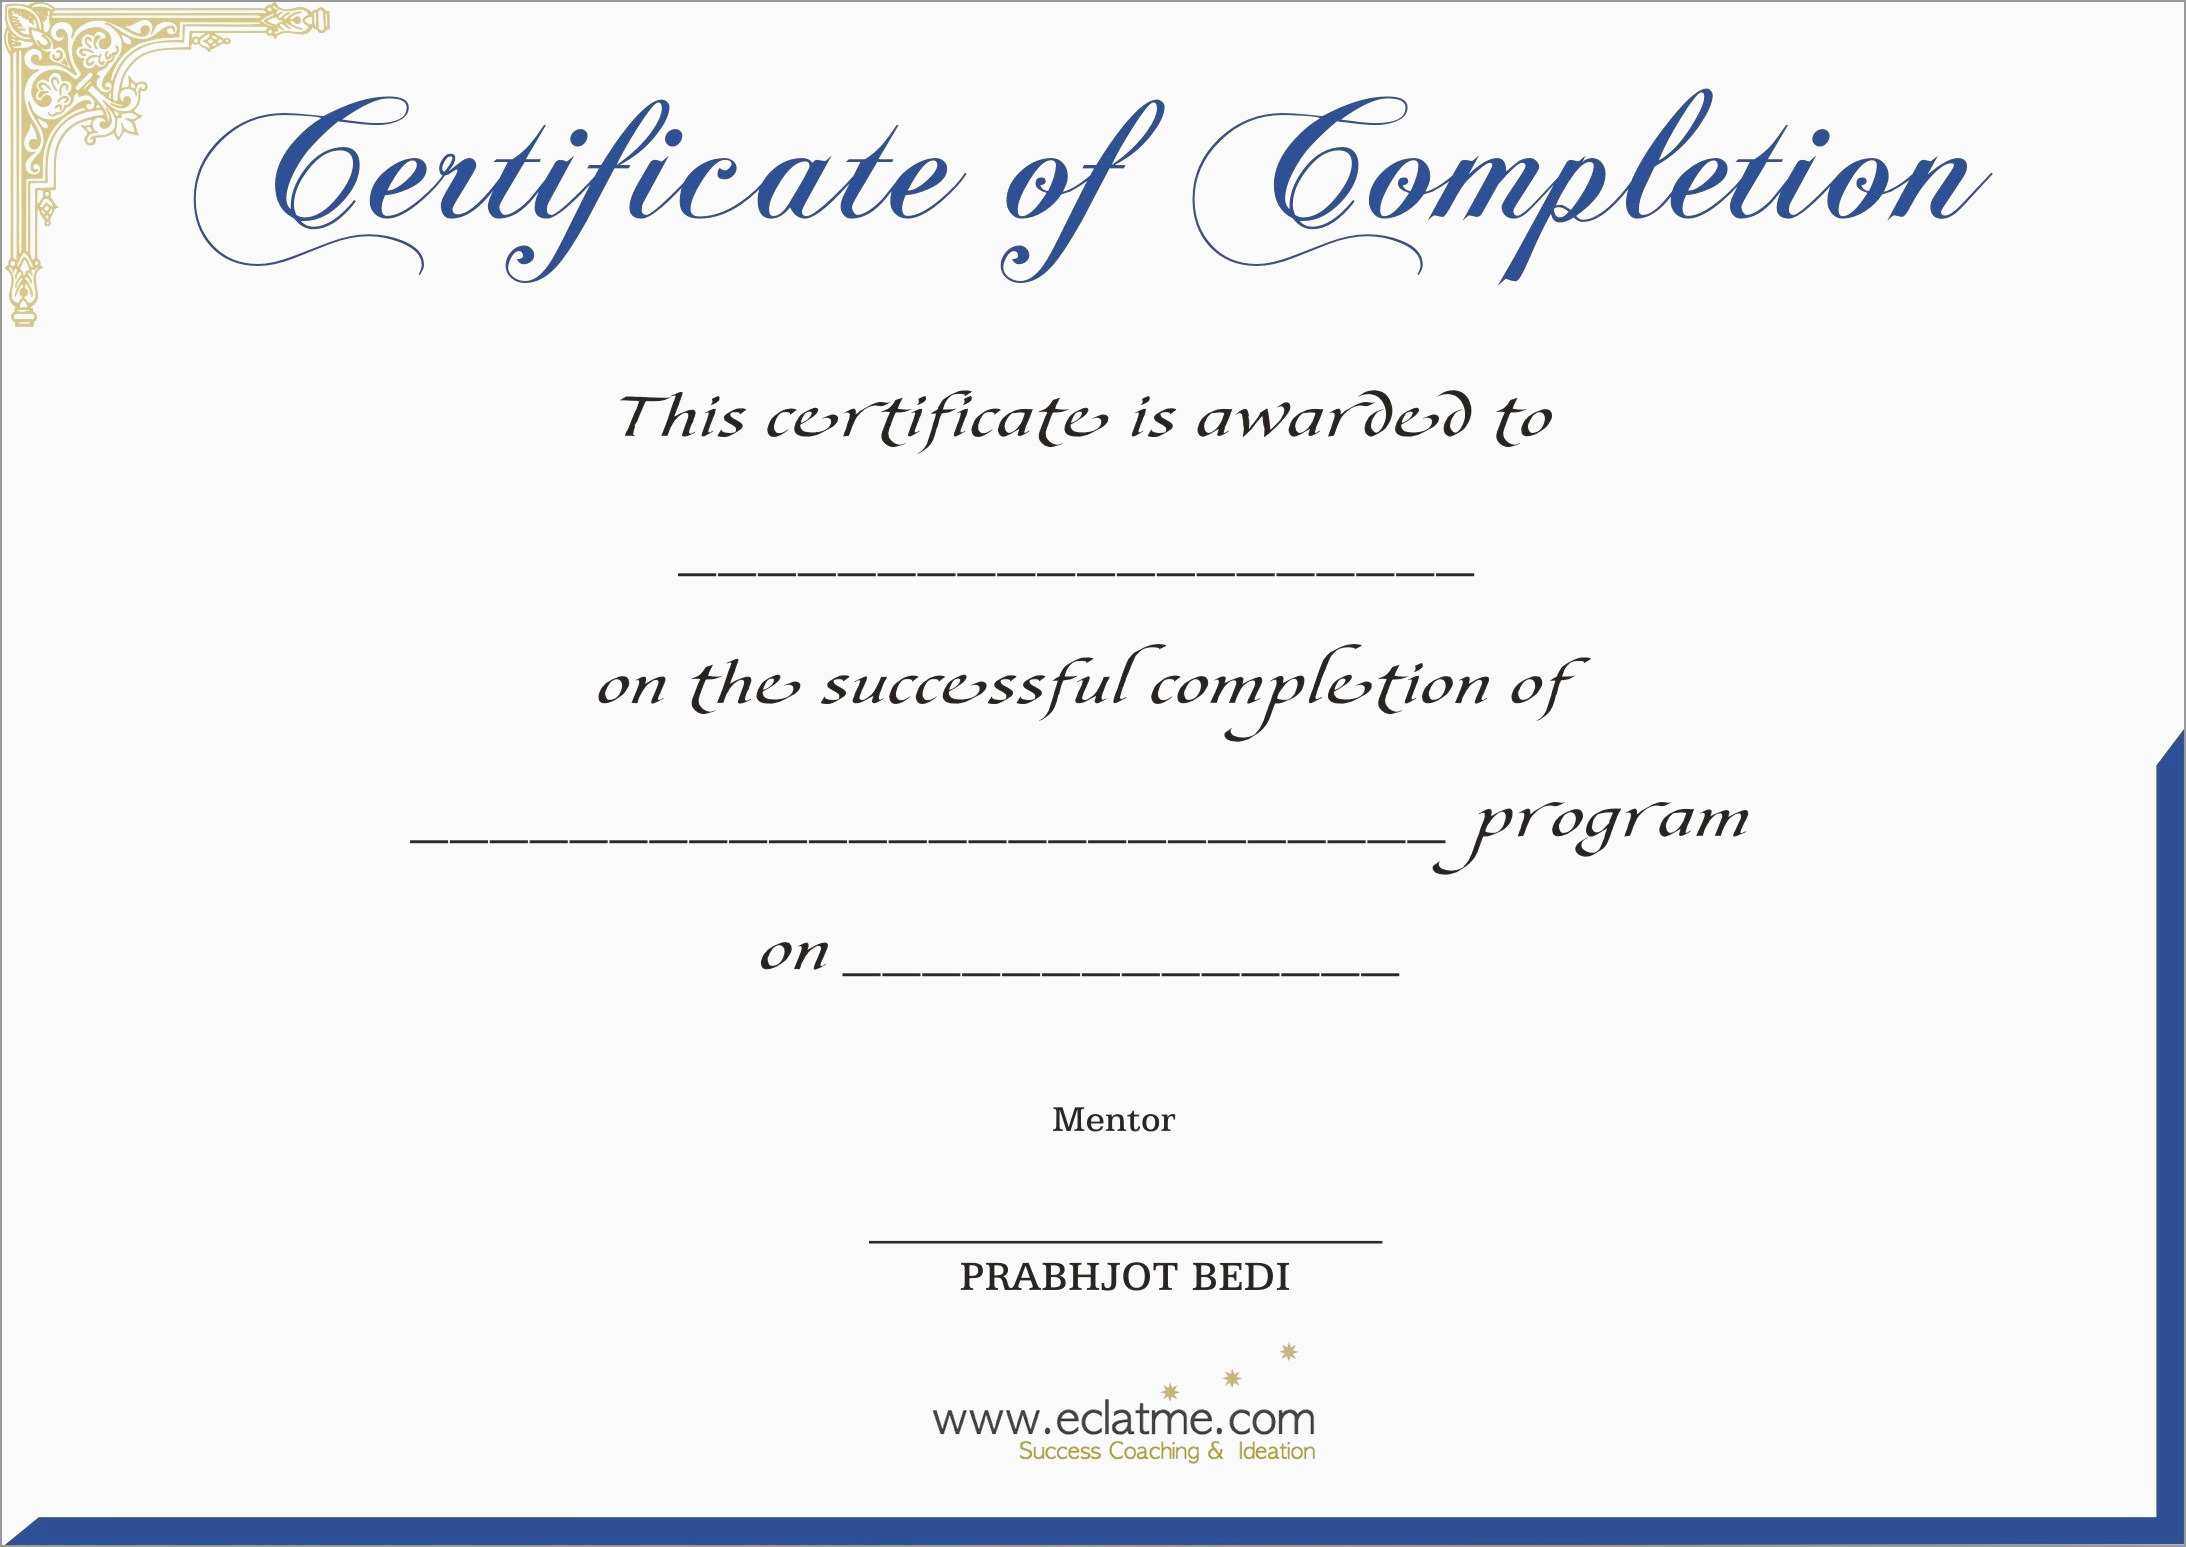 Free Printable Certificate Of Completion | Mult Igry With Regard To Certificate Of Completion Template Free Printable